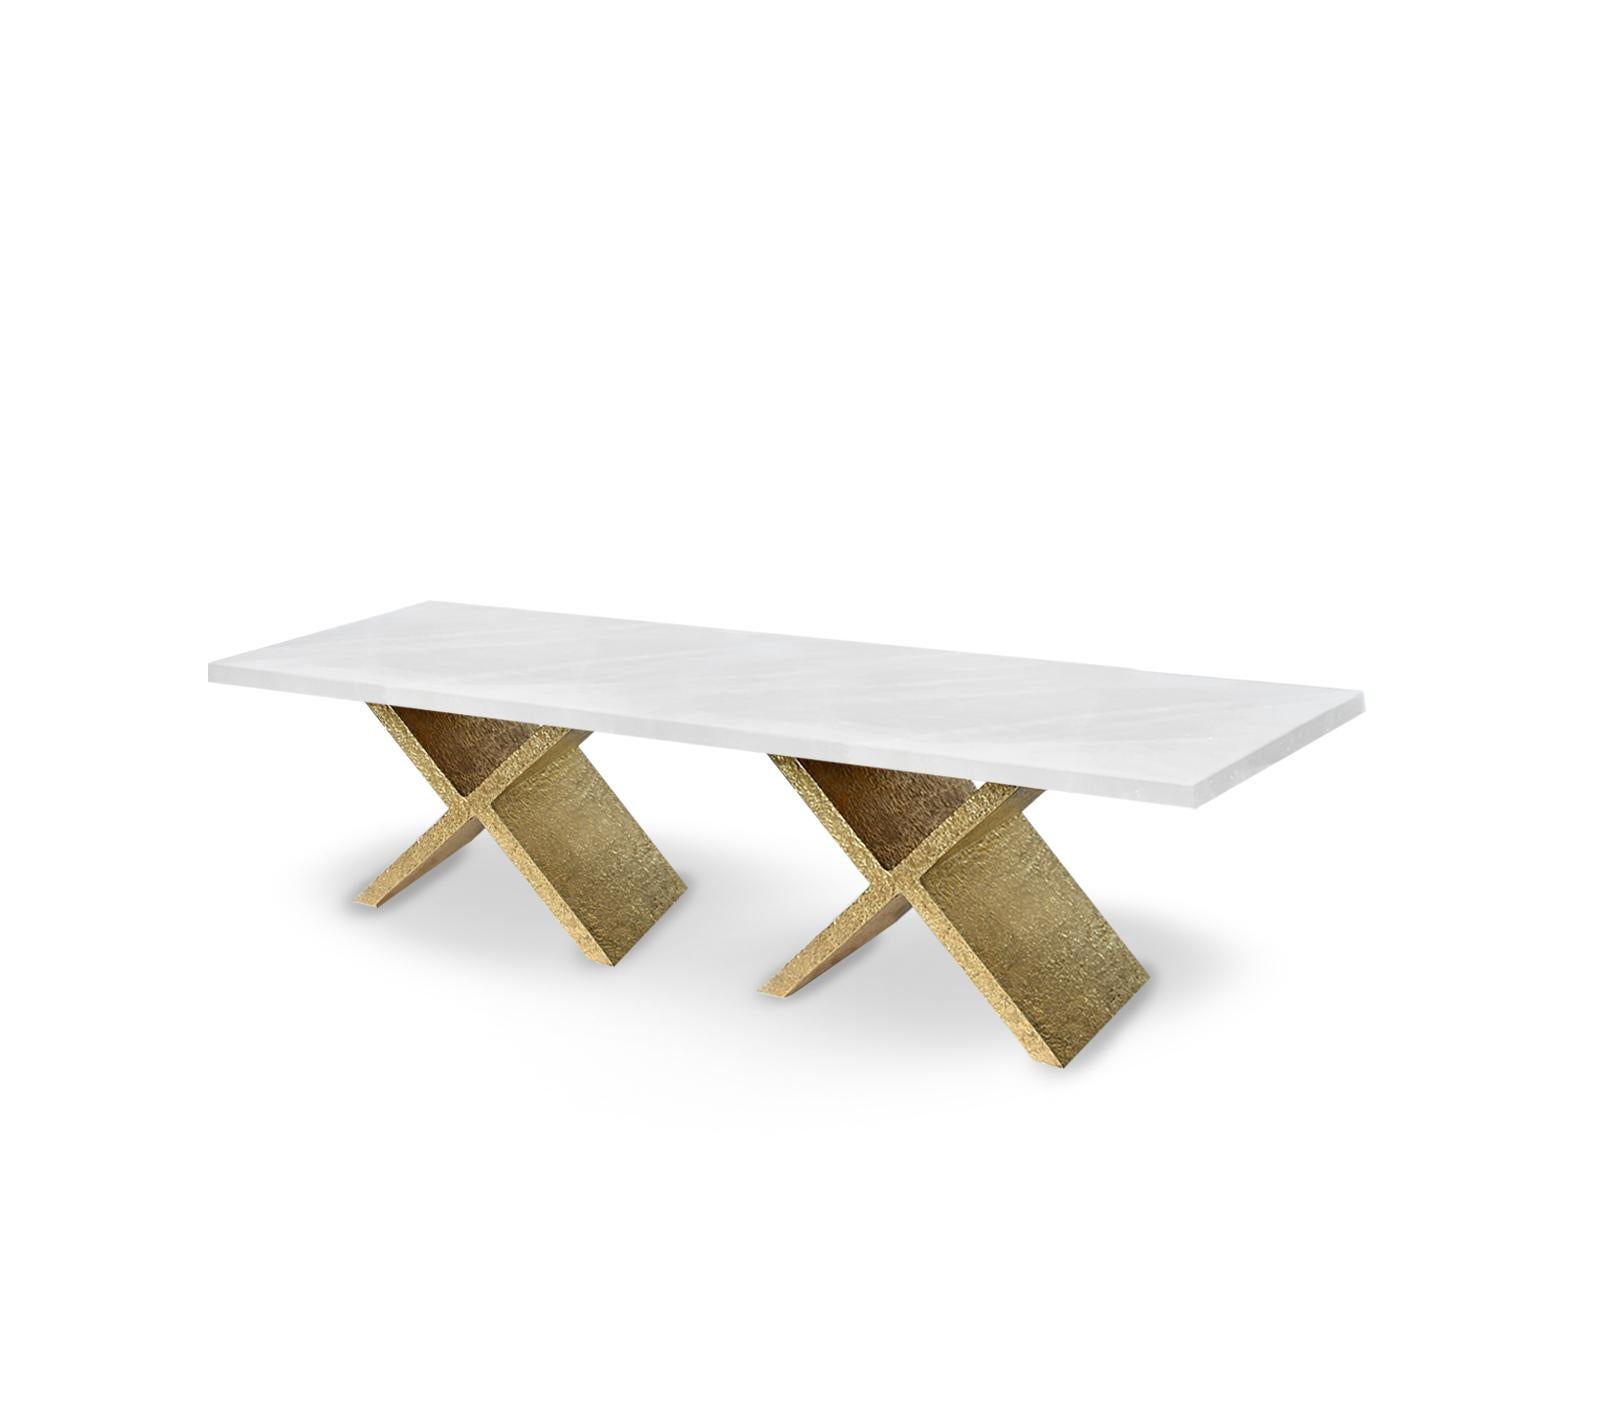 X coffee table, hammered details X brass bases with rock crystal top. Created by Phoenix gallery.

 